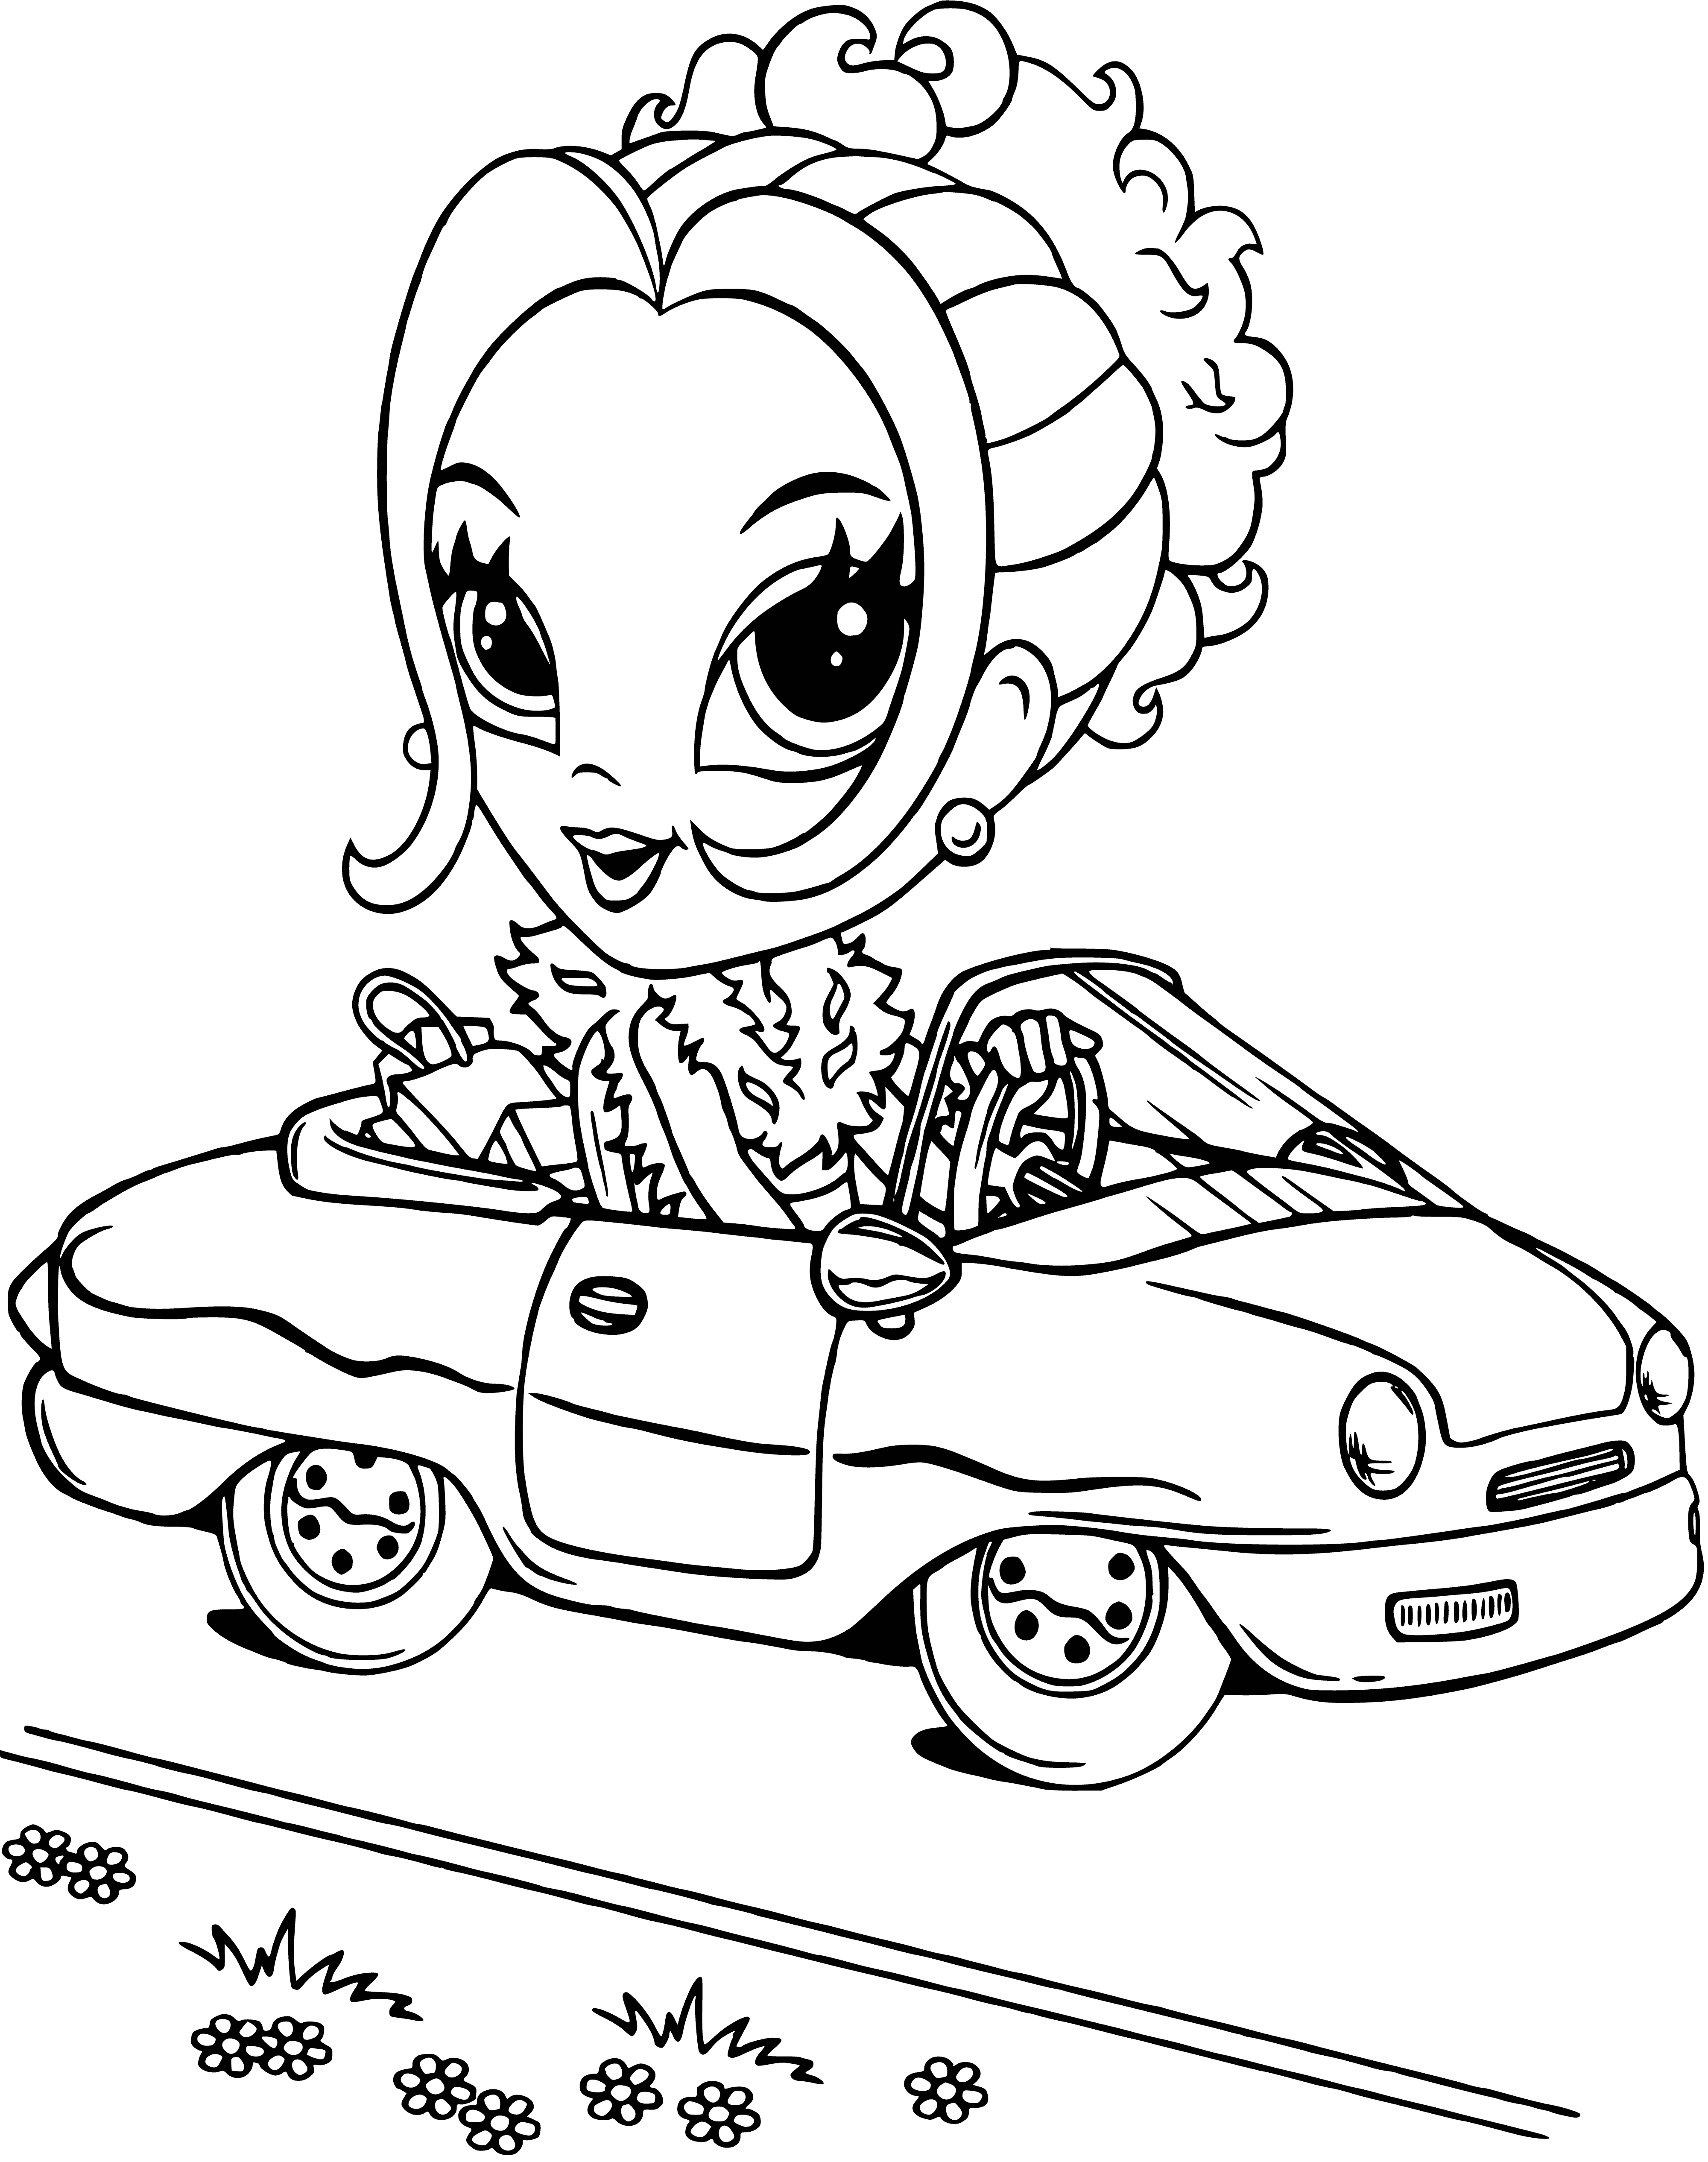 coloring page: Young woman in pink dress w/purple sash & gloves, holding pink fan & wearing a necklace w/large gem. Glamorous & chic!